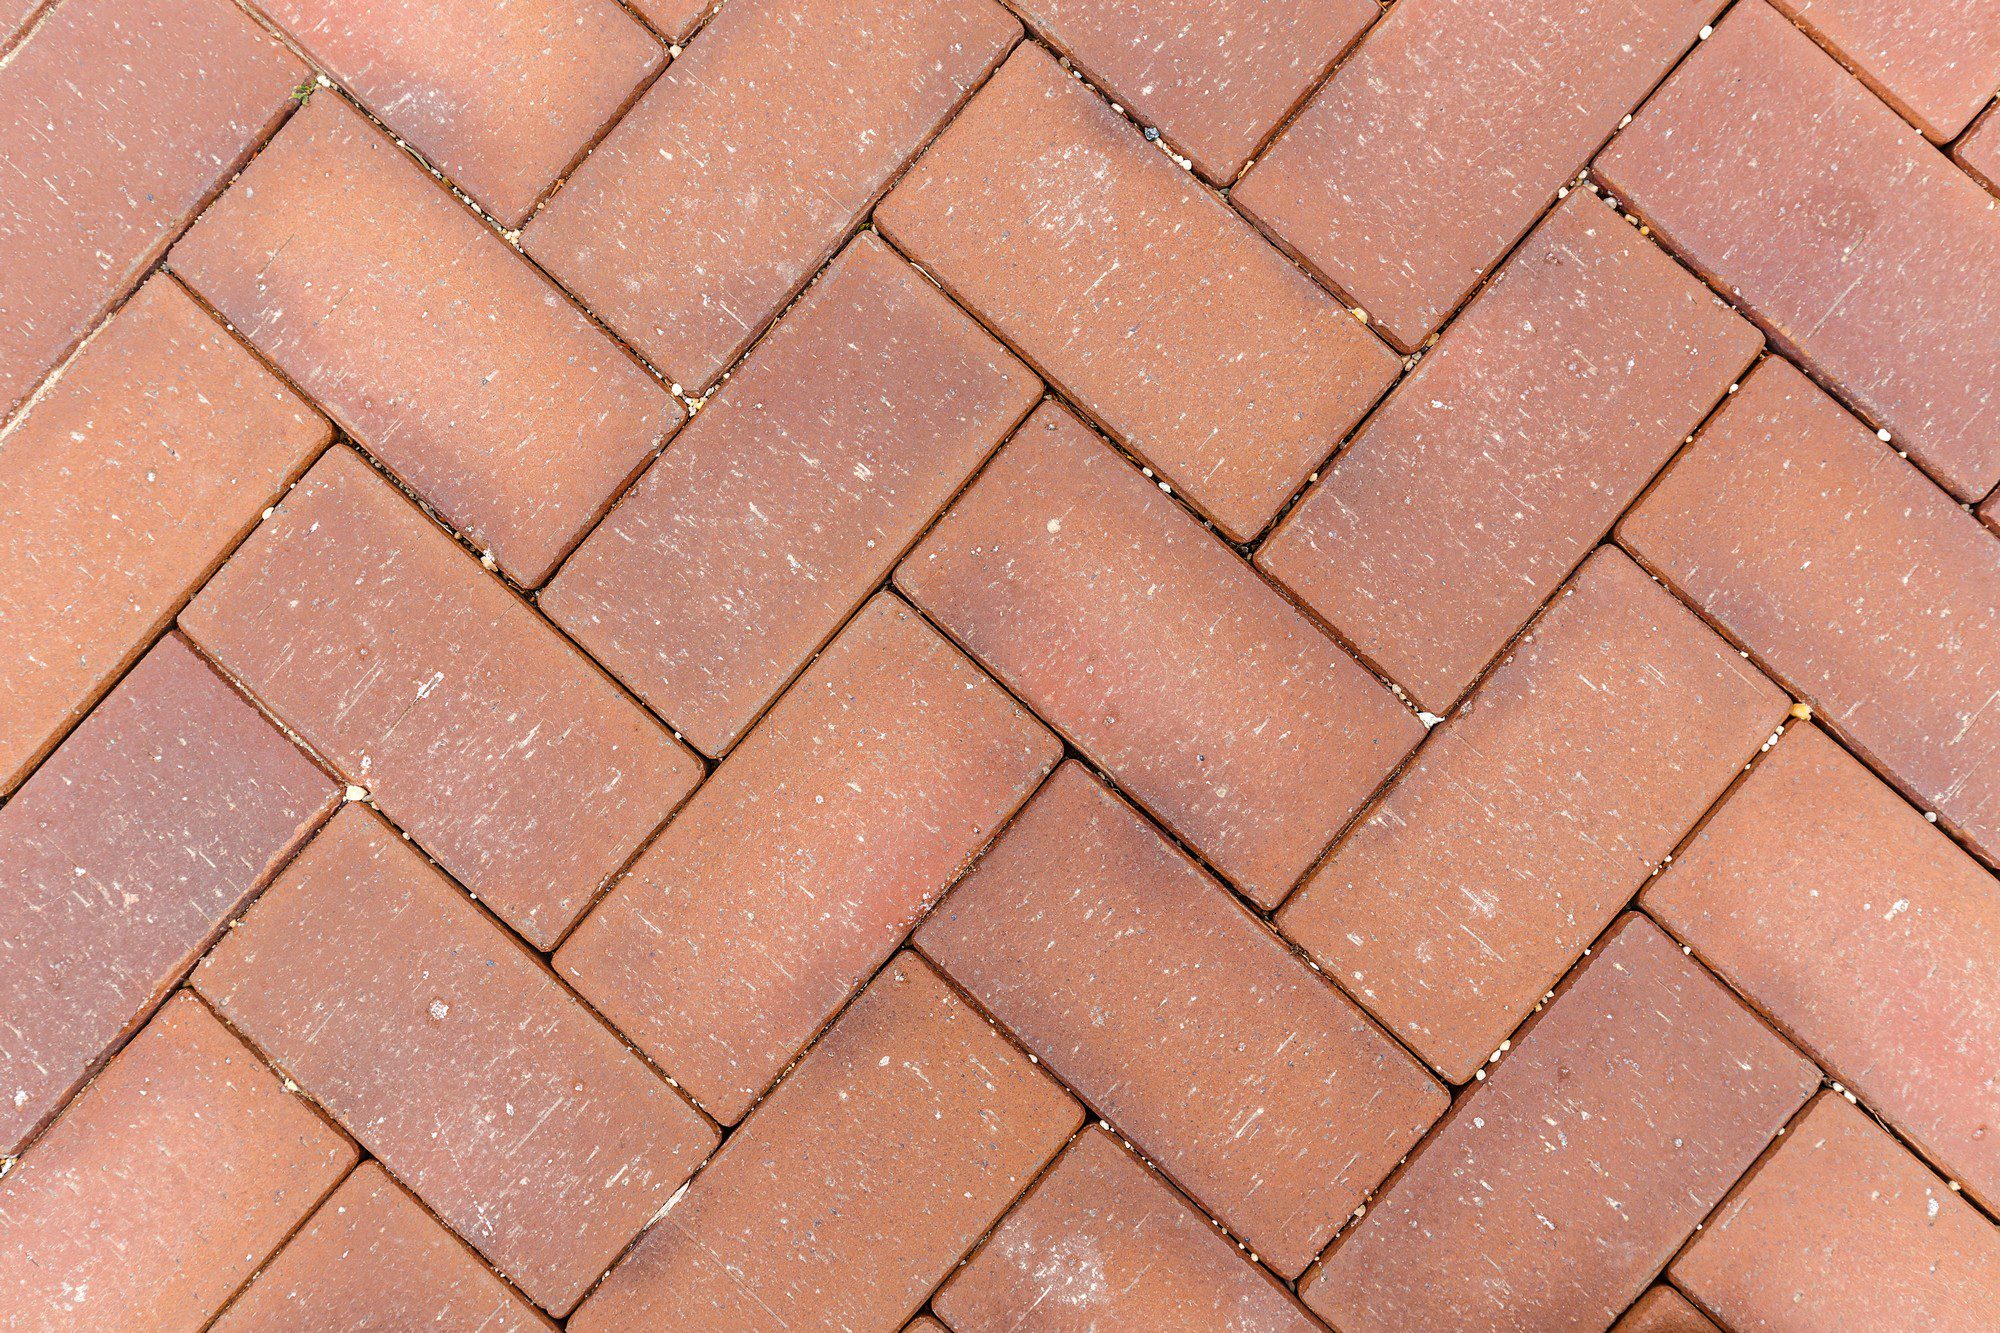 This image shows a section of herringbone patterned paving. The paving appears to be made up of rectangular bricks arranged in an interlocking pattern at a 45-degree angle. This type of pattern is commonly used for pathways, patios, driveways, and other outdoor surfaces. The bricks are reddish-brown in colour and there are some slight signs of wear, as well as small debris accumulated in the joints between the bricks.